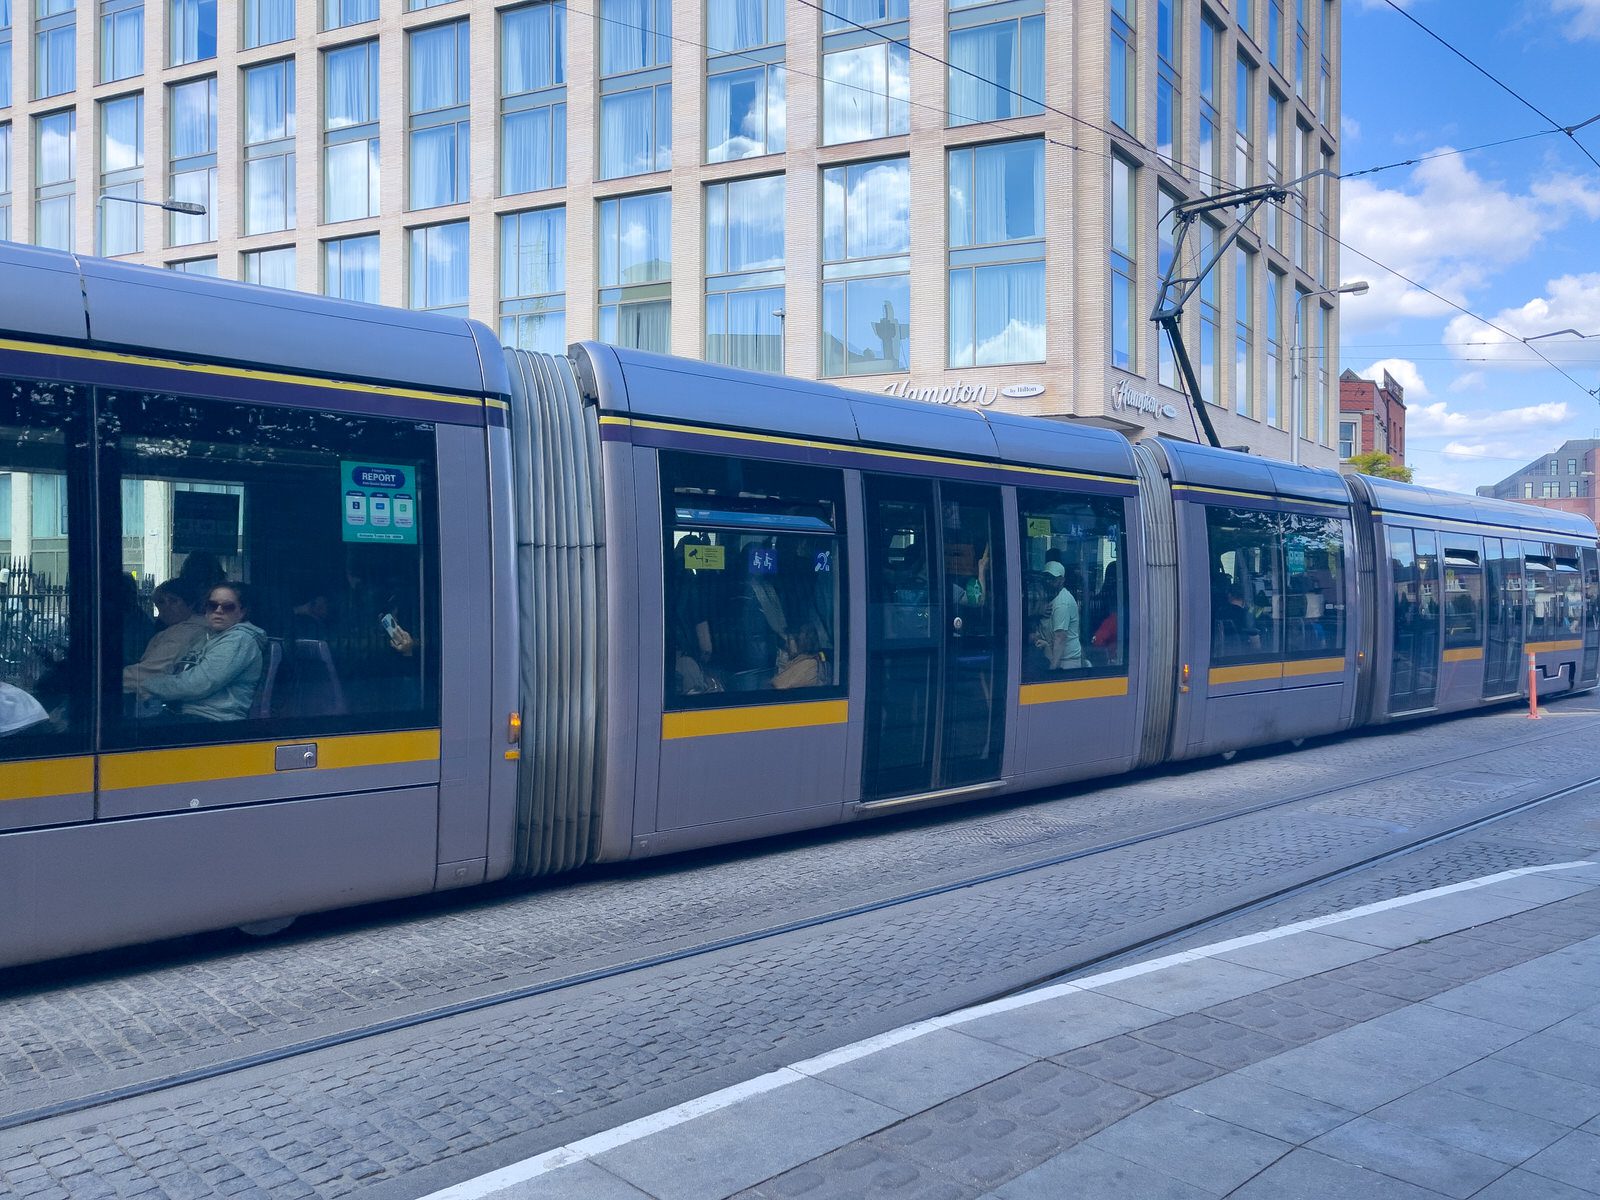 THE LUAS FOUR COURTS TRAM STOP [THERE IS MUCH TO BE SEEN HERE]-234110-1